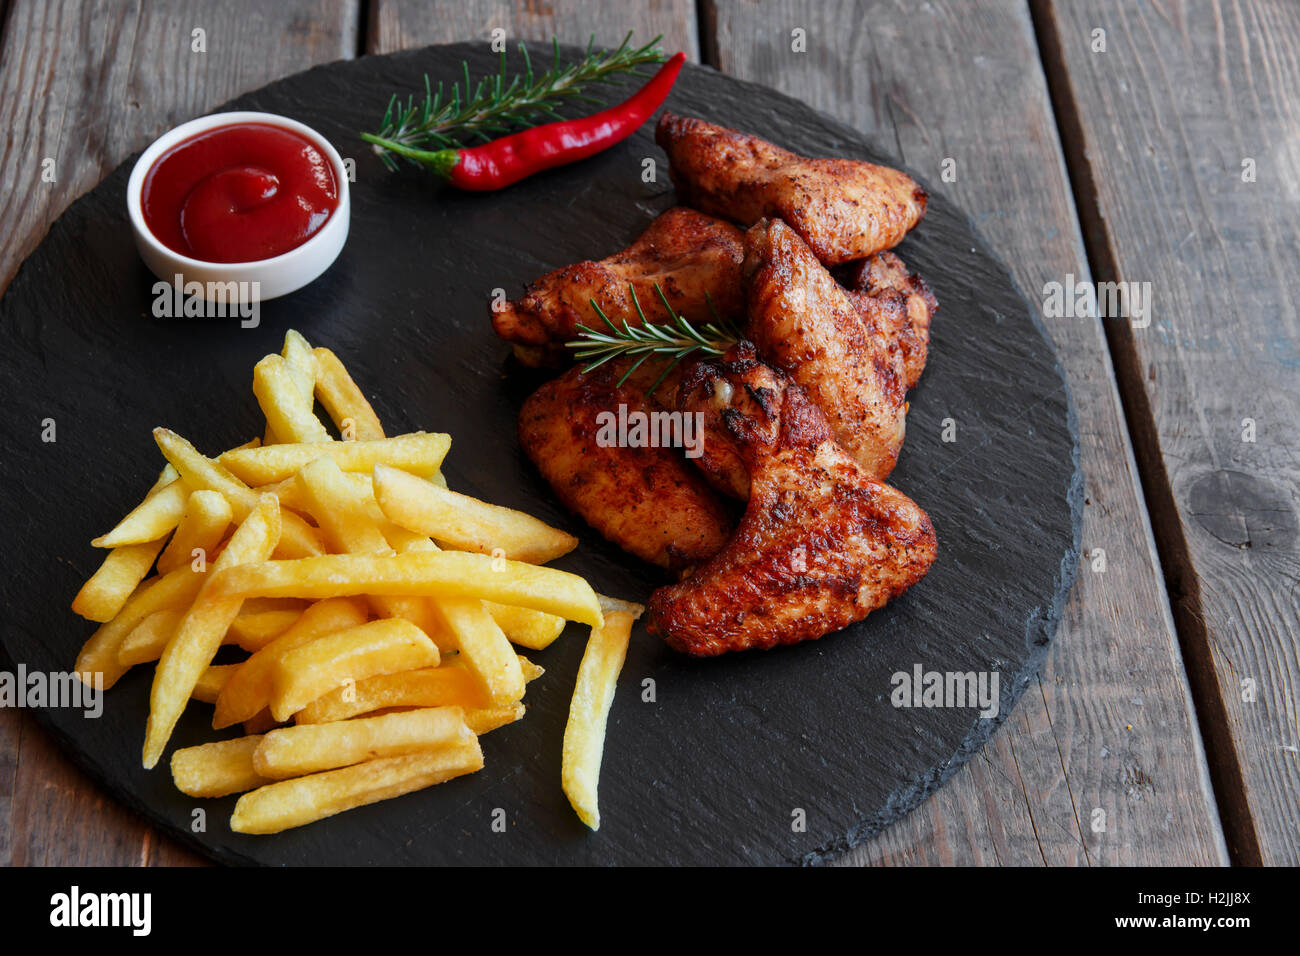 Fried roasted chicken wings french fries and sauce Stock Photo